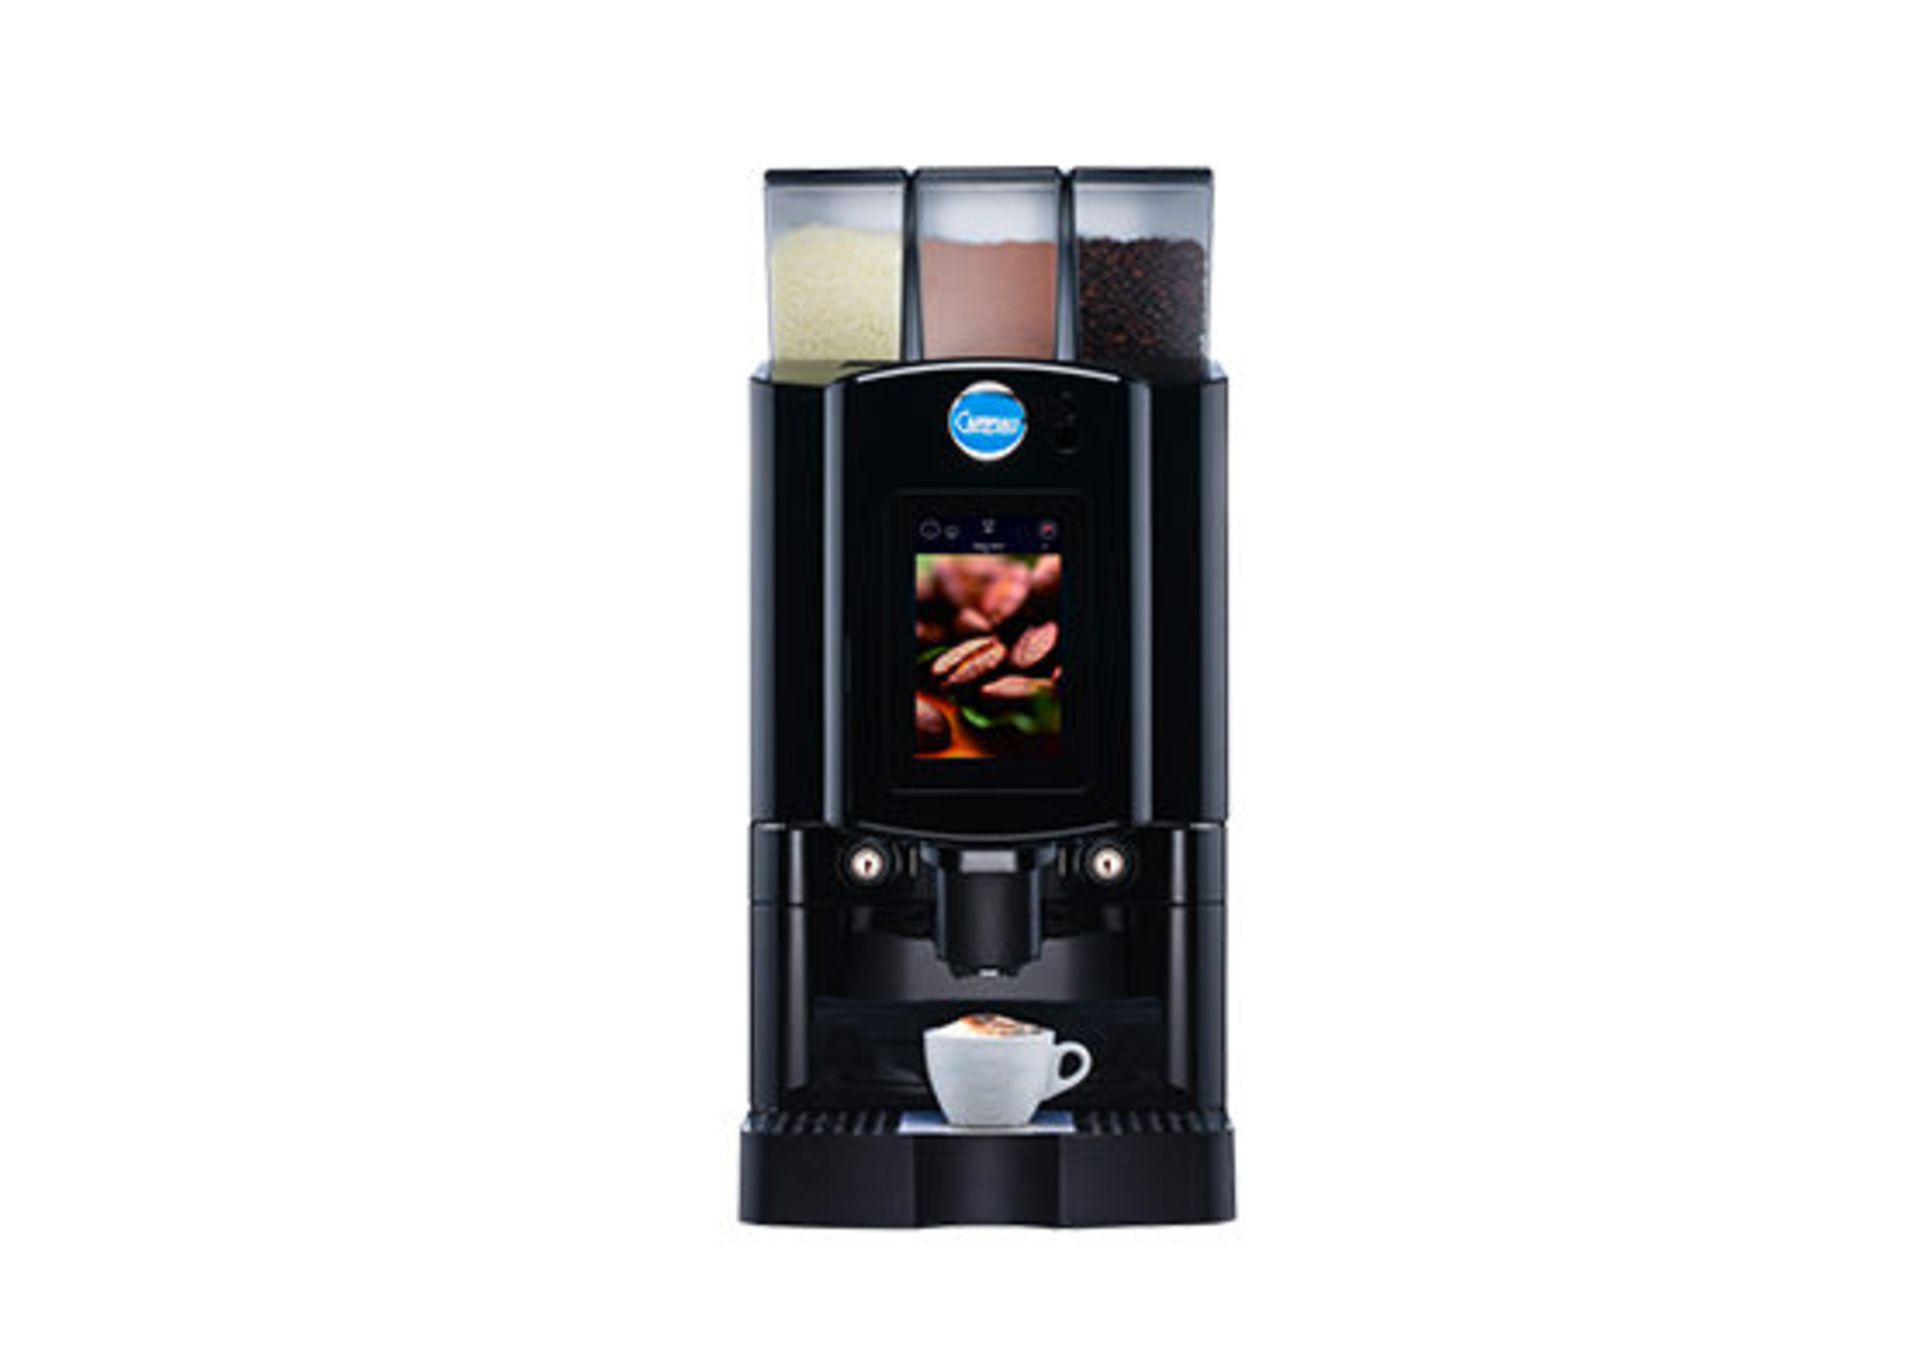 Carimali Solar Touch Drinks Machine – Bean to cup Coffee + Chocolate & Other Drinks  The Carimali - Image 2 of 2